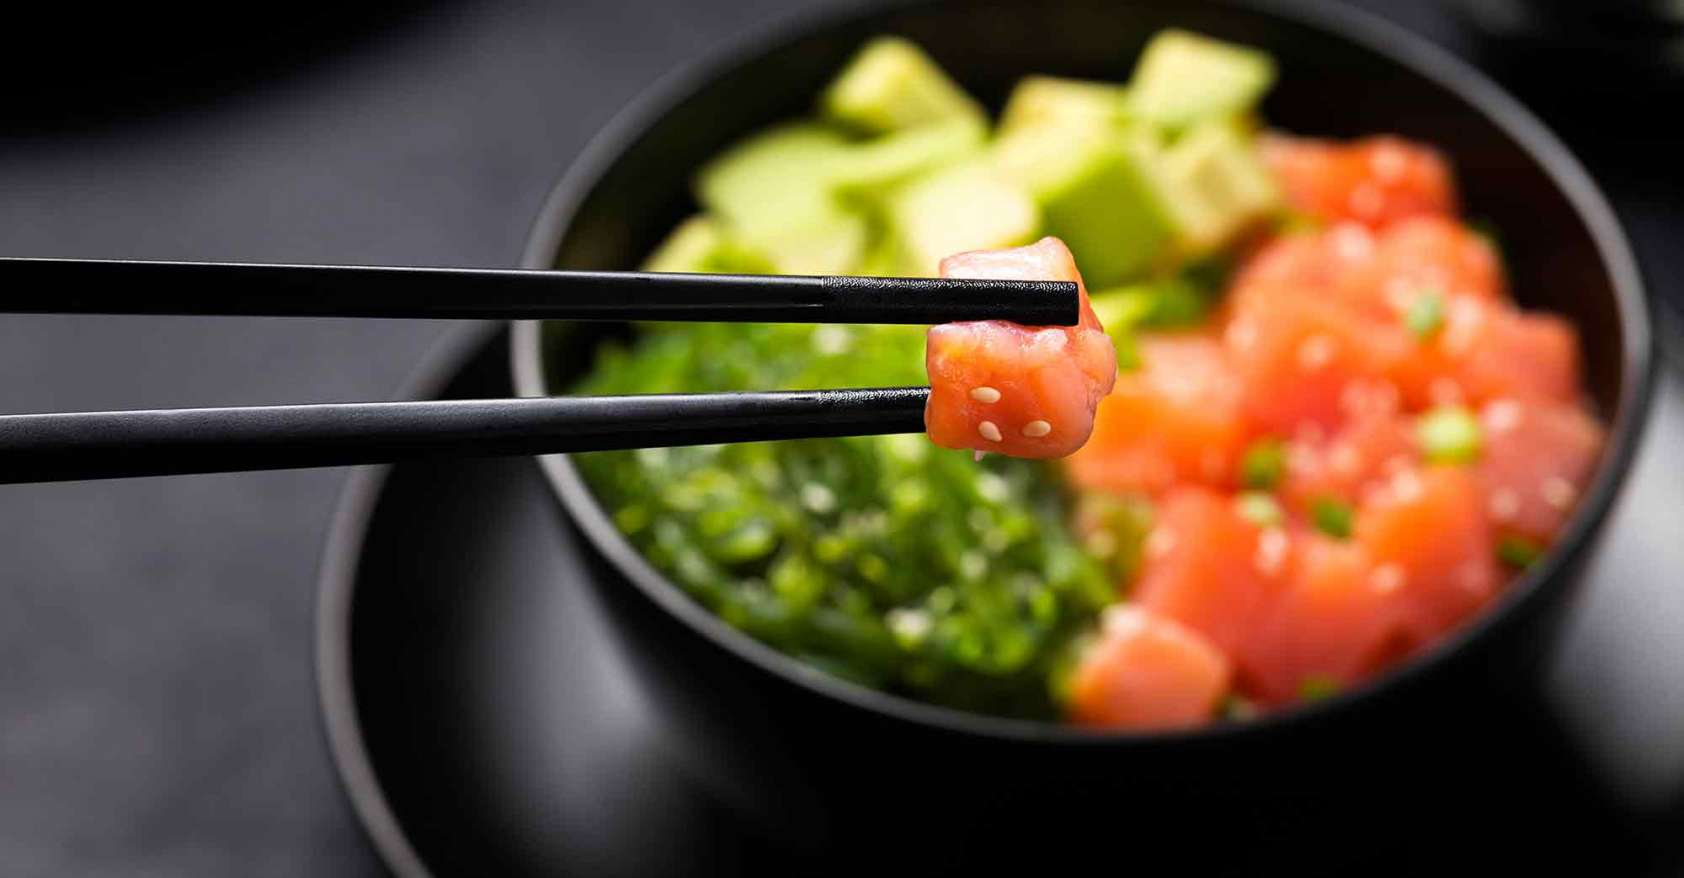 Poke with diced red fish avocado and green seaweeds salad with piece of salmon in chopsticks in foreground 2020 trends